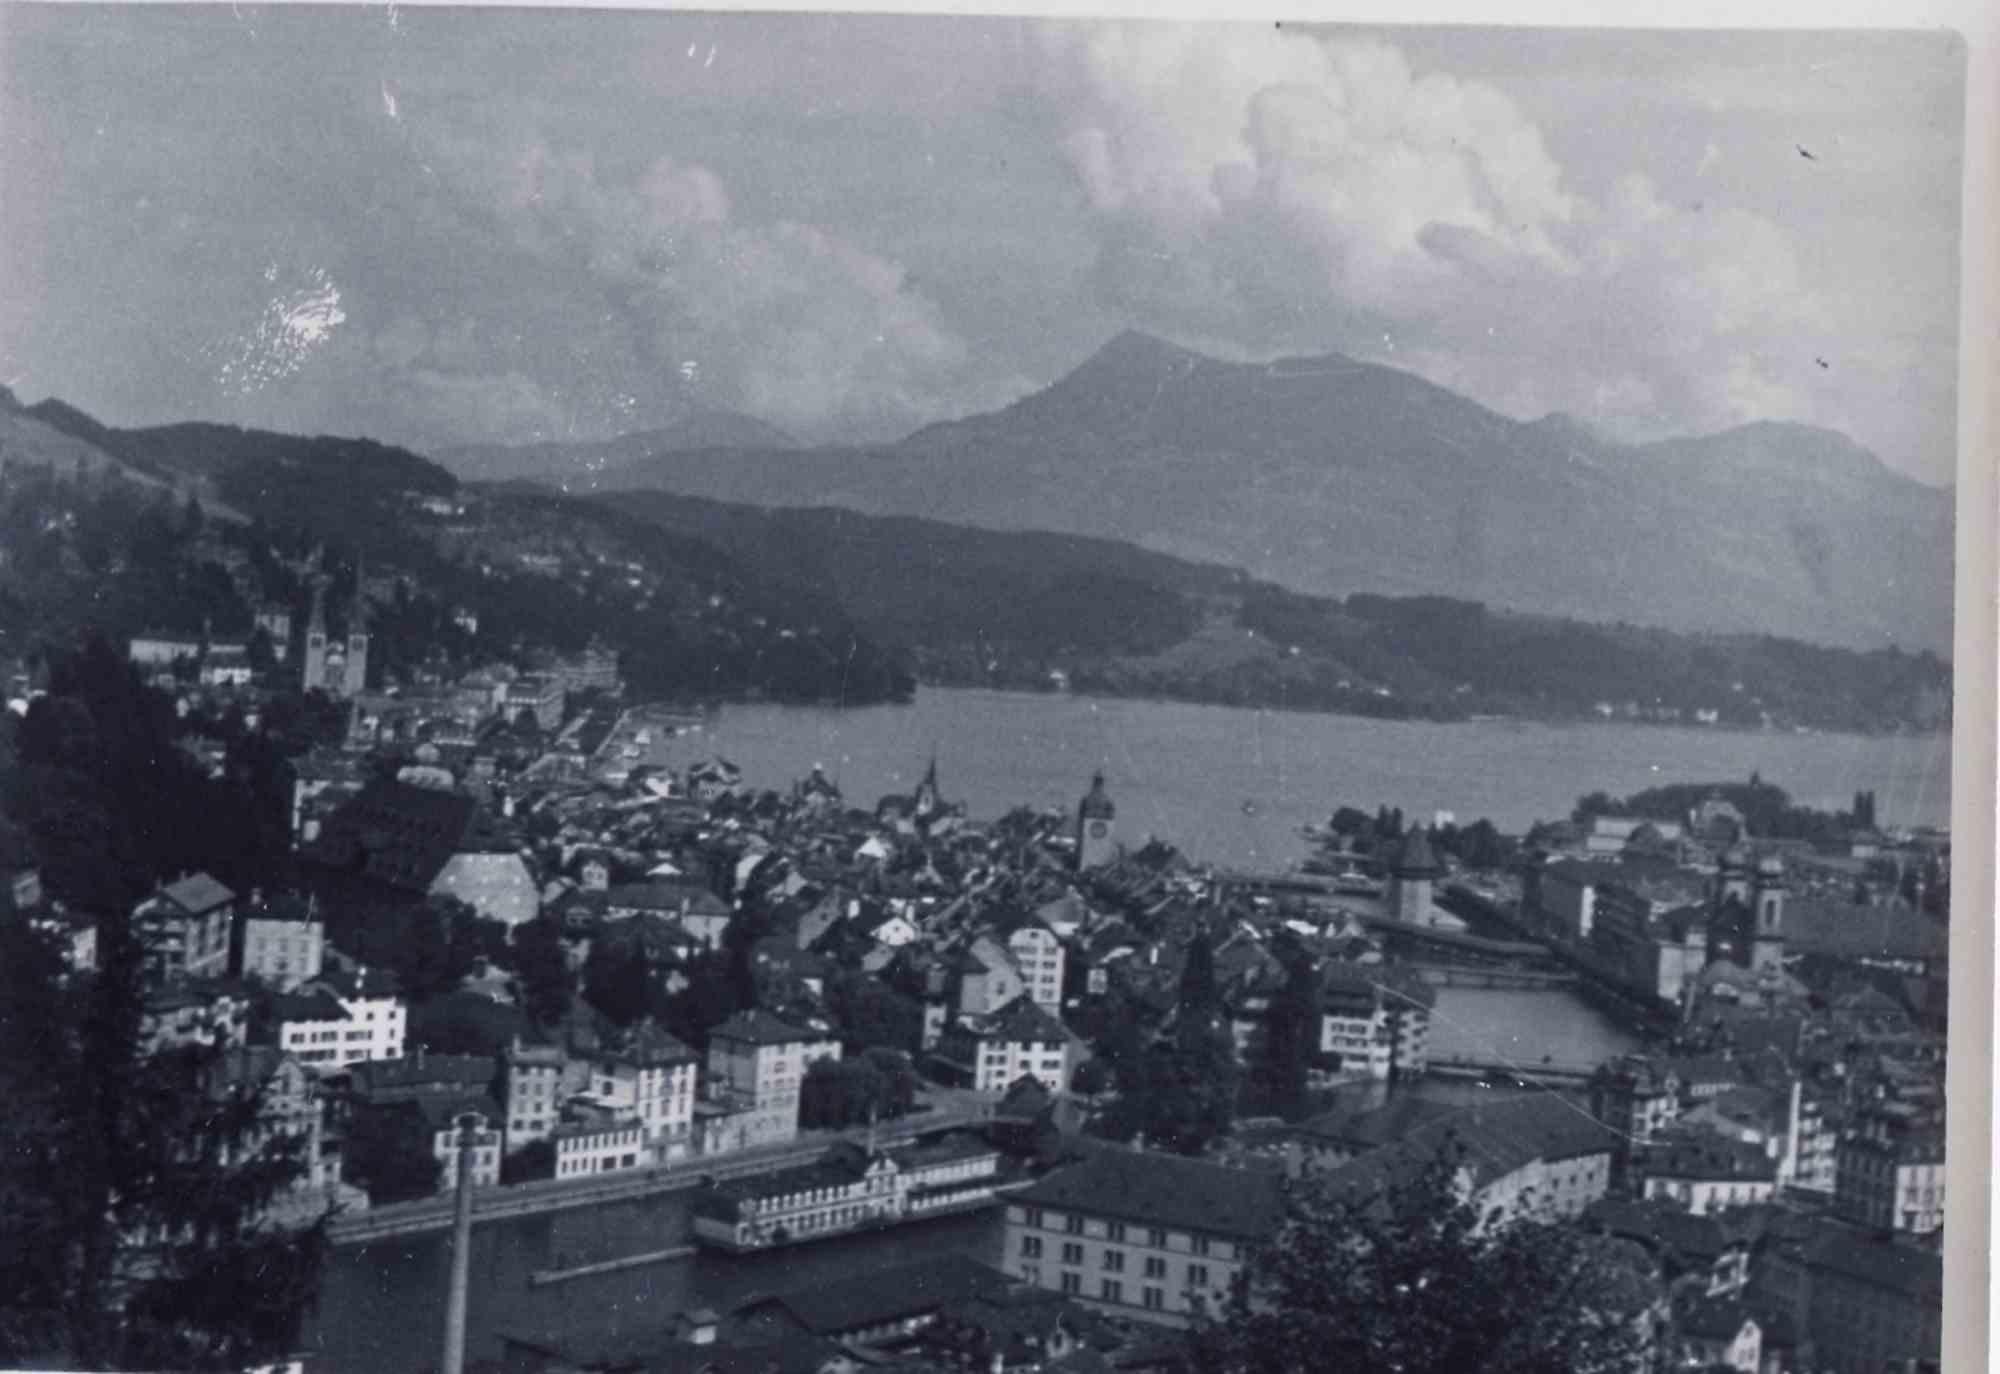 Unknown Landscape Photograph - Old days Photo - Cityscape - Vintage Photo - Early 20th Century